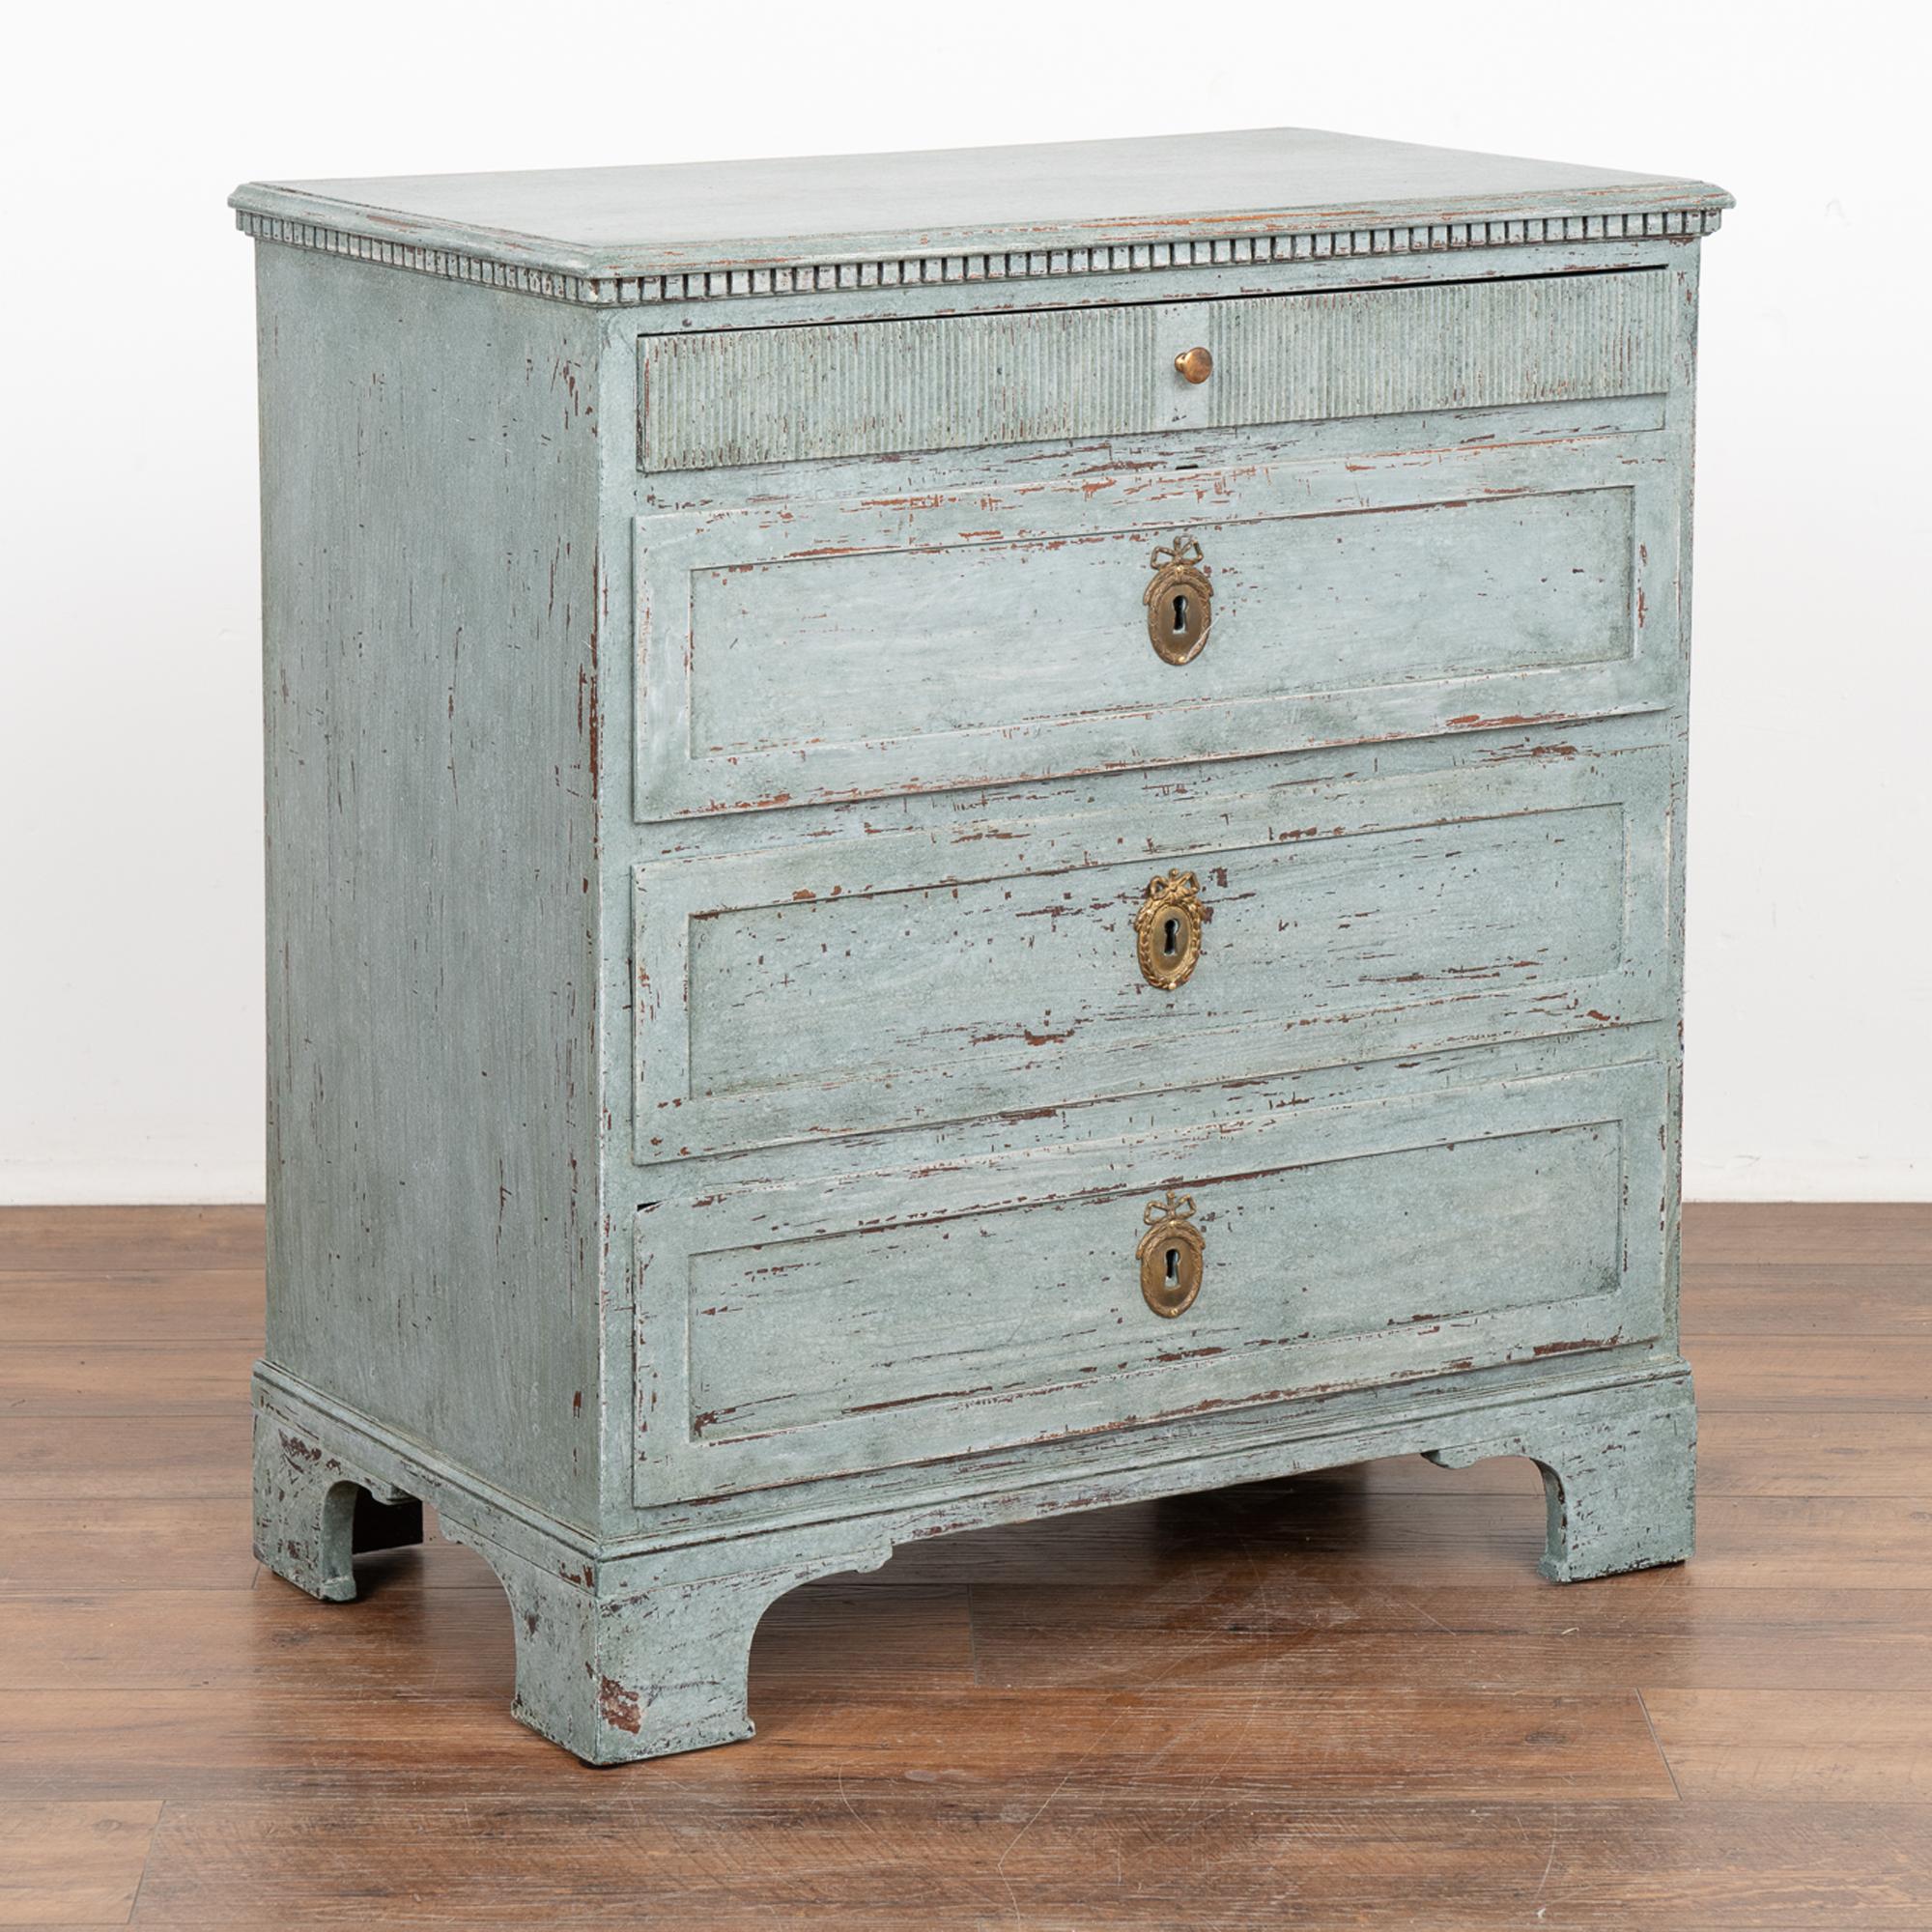 This lovely Gustavian pine chest of drawers has the simple yet elegant lines that reveal its Swedish country style which is reflected in the carved dentil molding along top and fluted detail of the top drawer.
Restored, later professionally applied